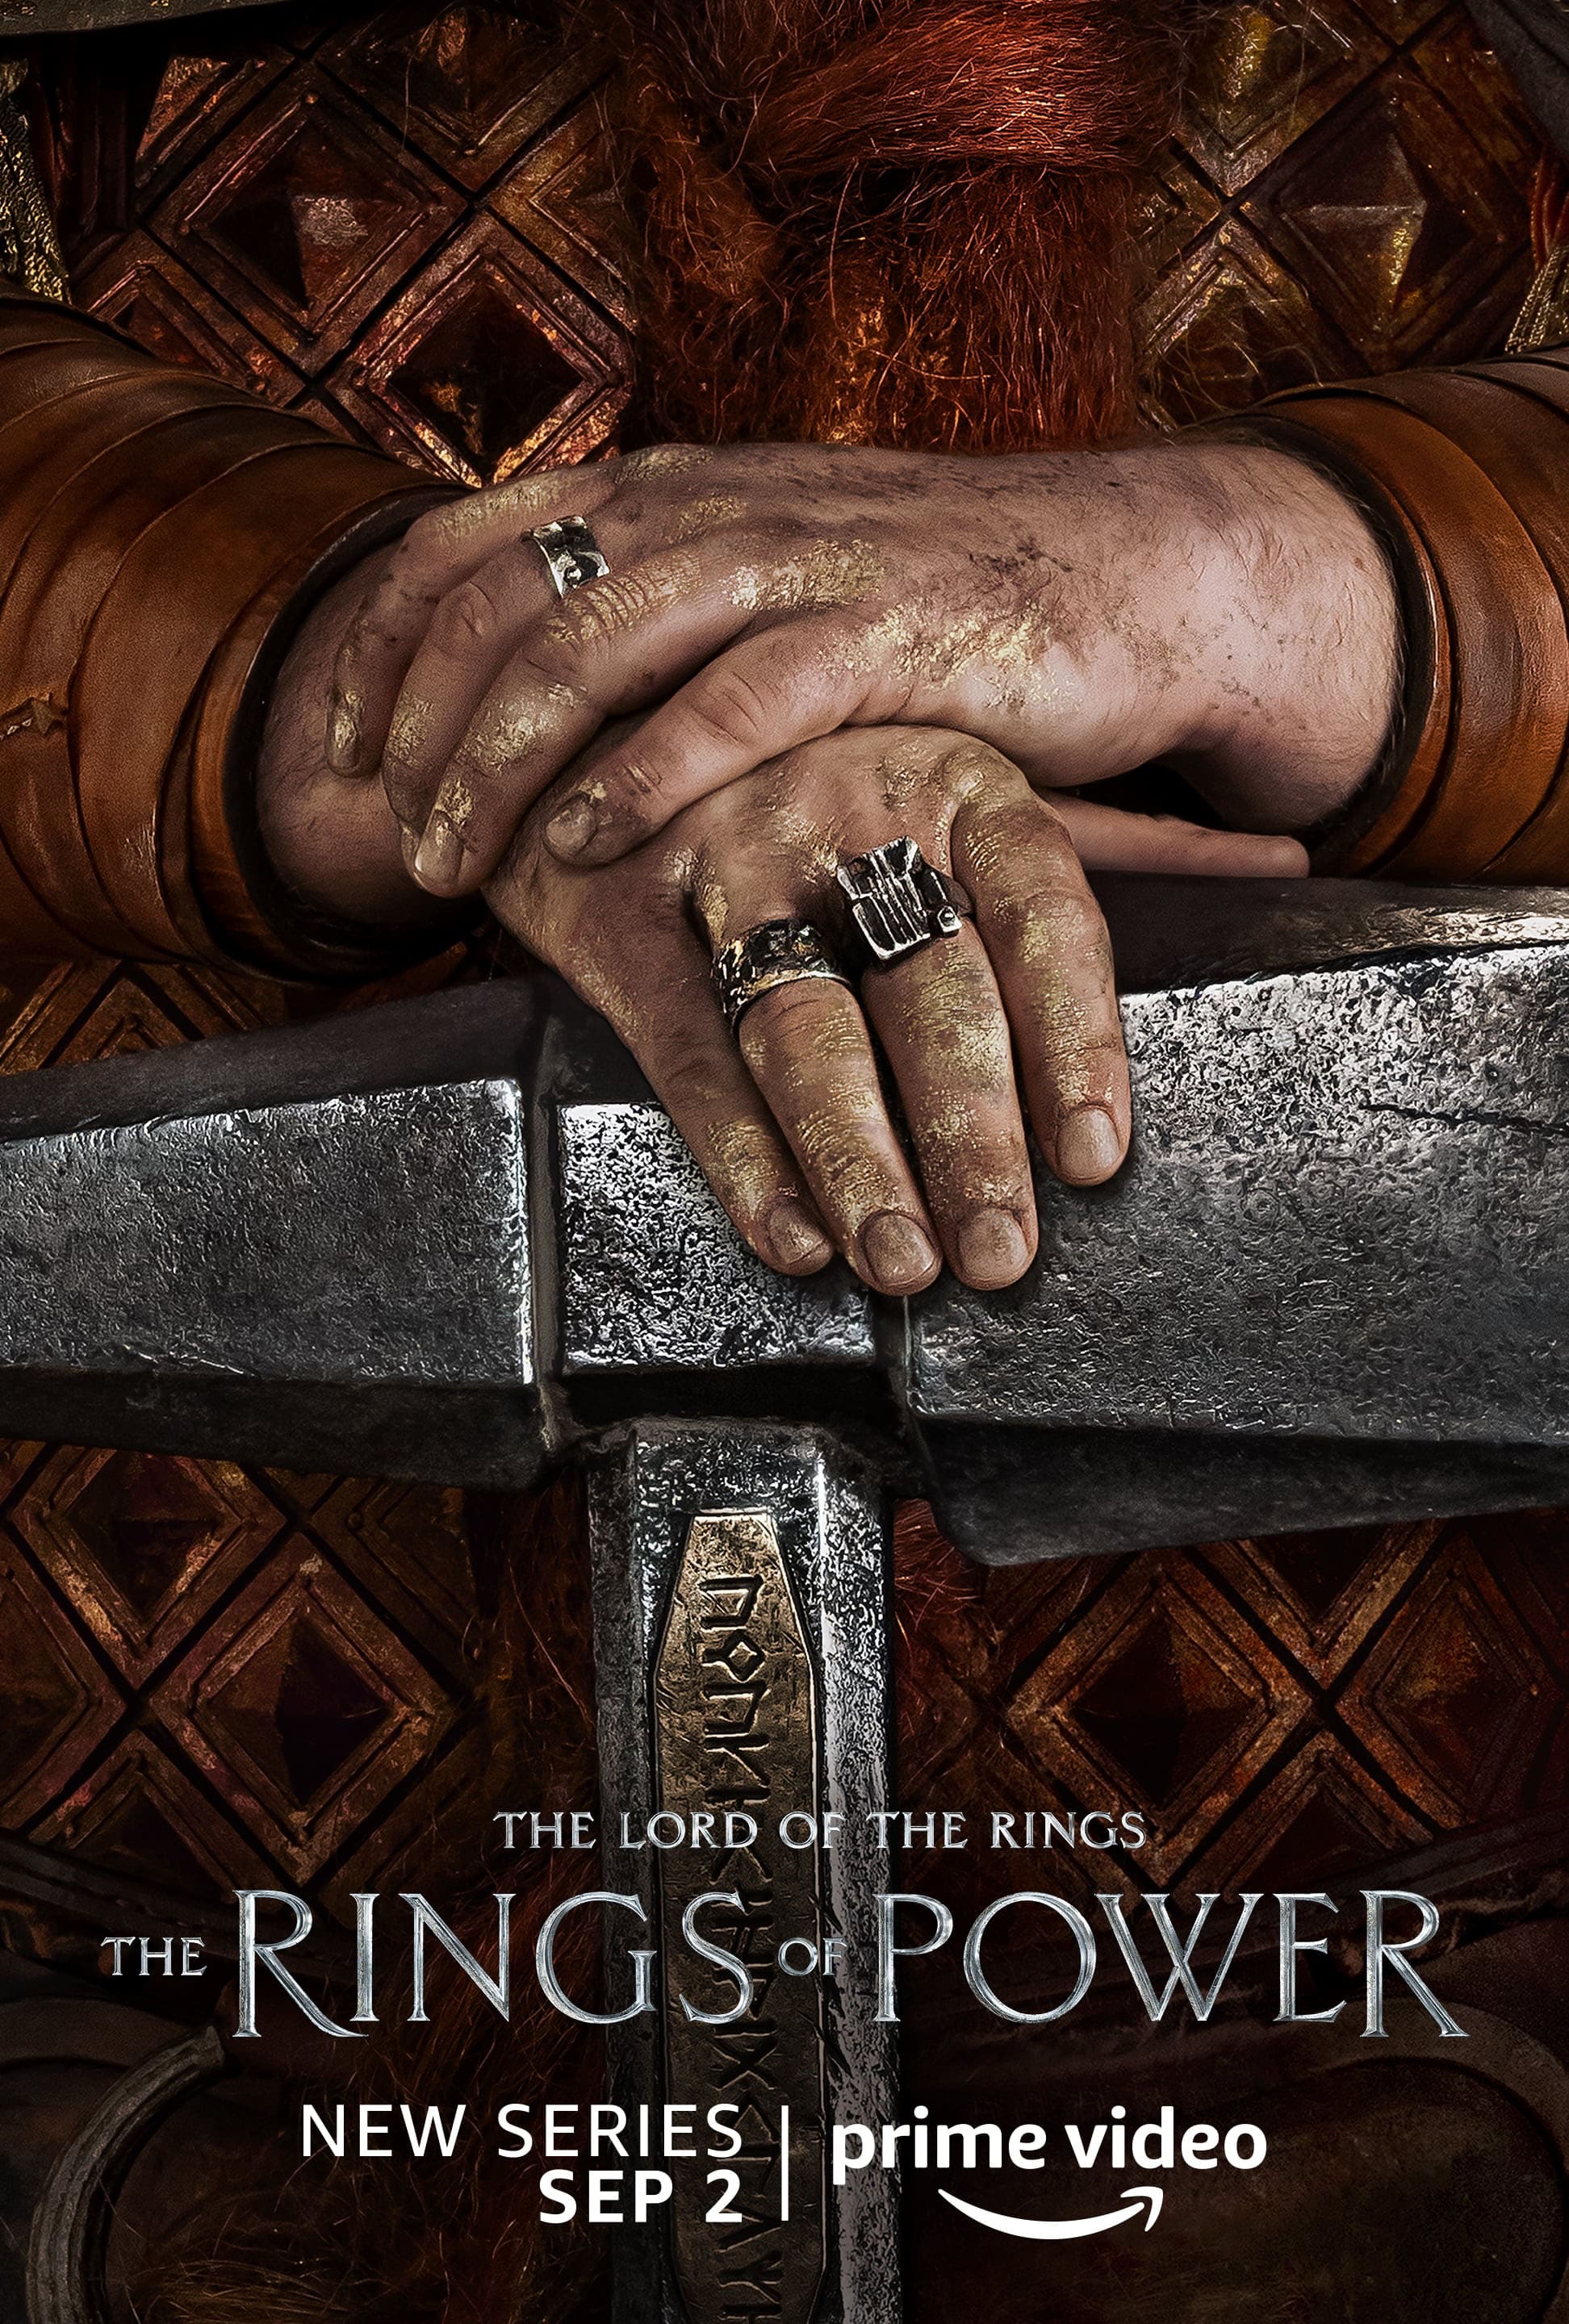 movie news, Prime Video, the lord of the rings, The Rings of Power, trailer